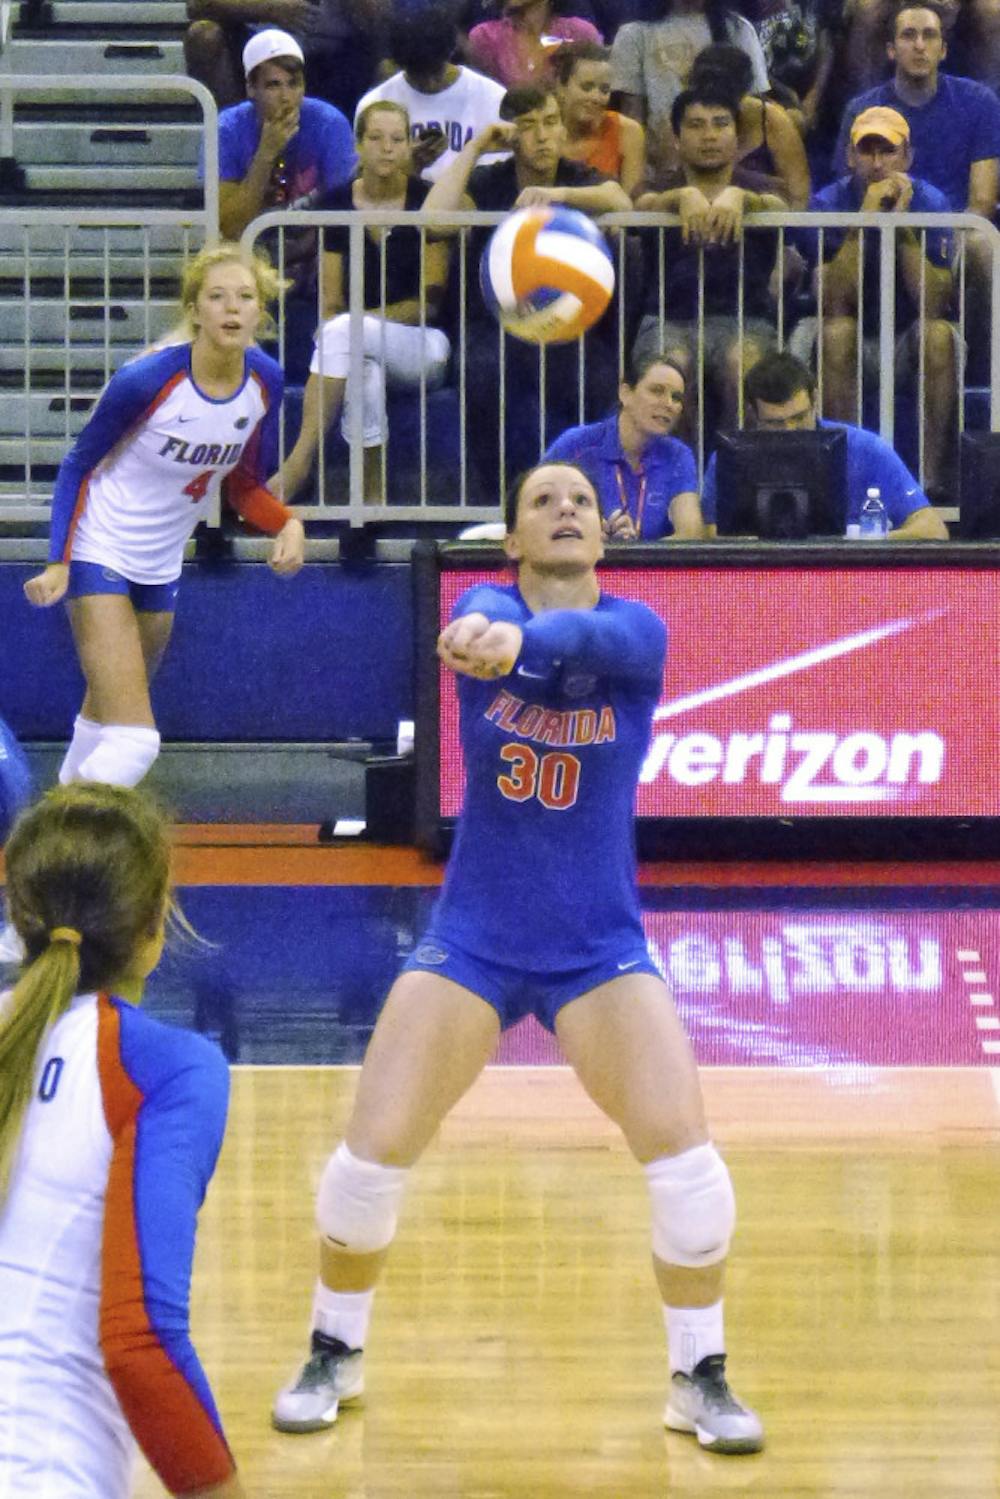 <p>Holly Pole digs the ball during Florida's 3-1 loss to Texas on Saturday Sept. 6, in the O'Connell Center</p>